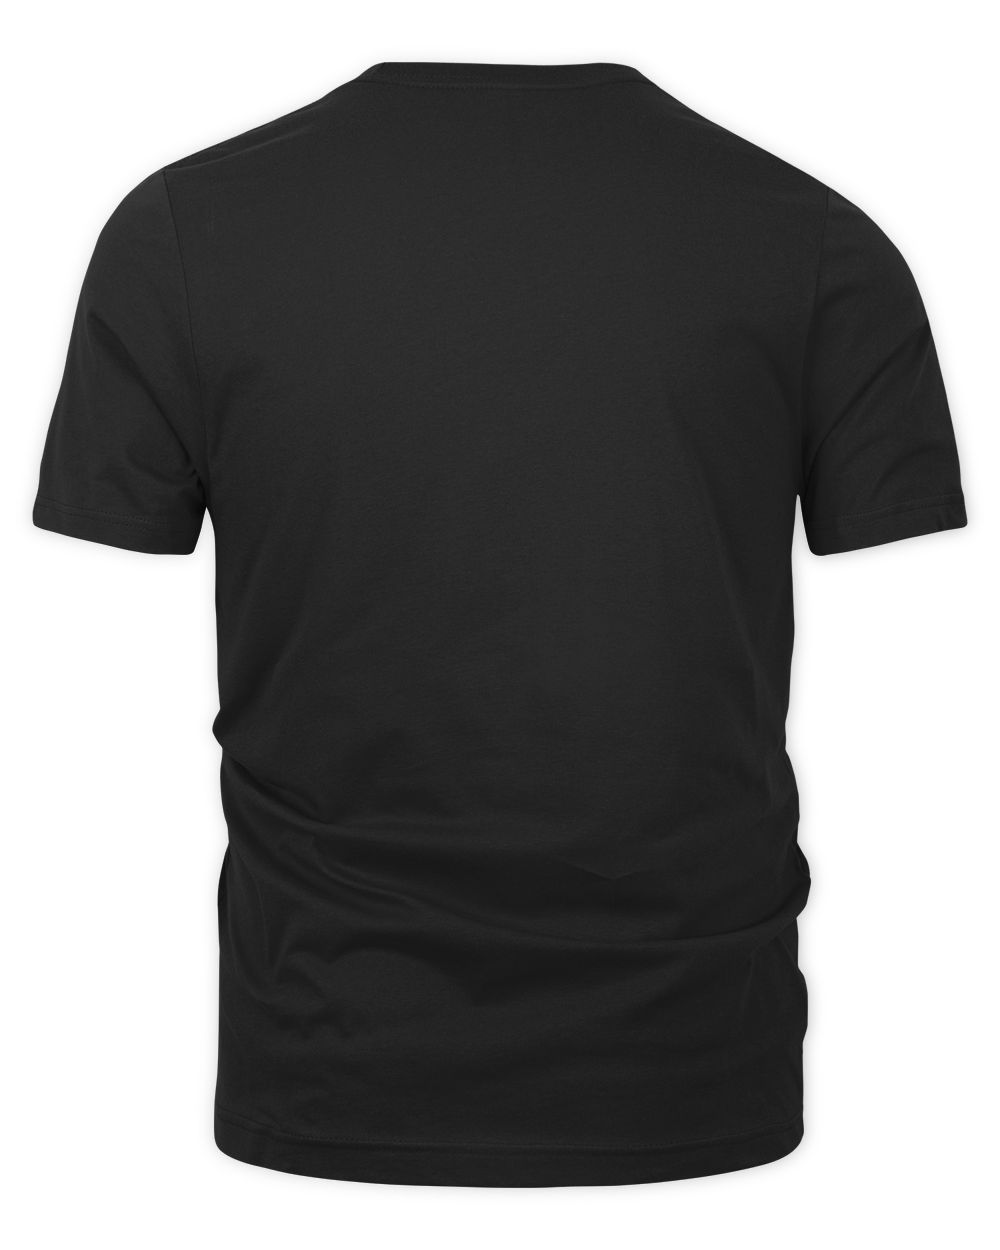 YOUR NAME. The Man. The Myth. The Legend. Great personalised T-Shirts Men's Premium Tshirt black 